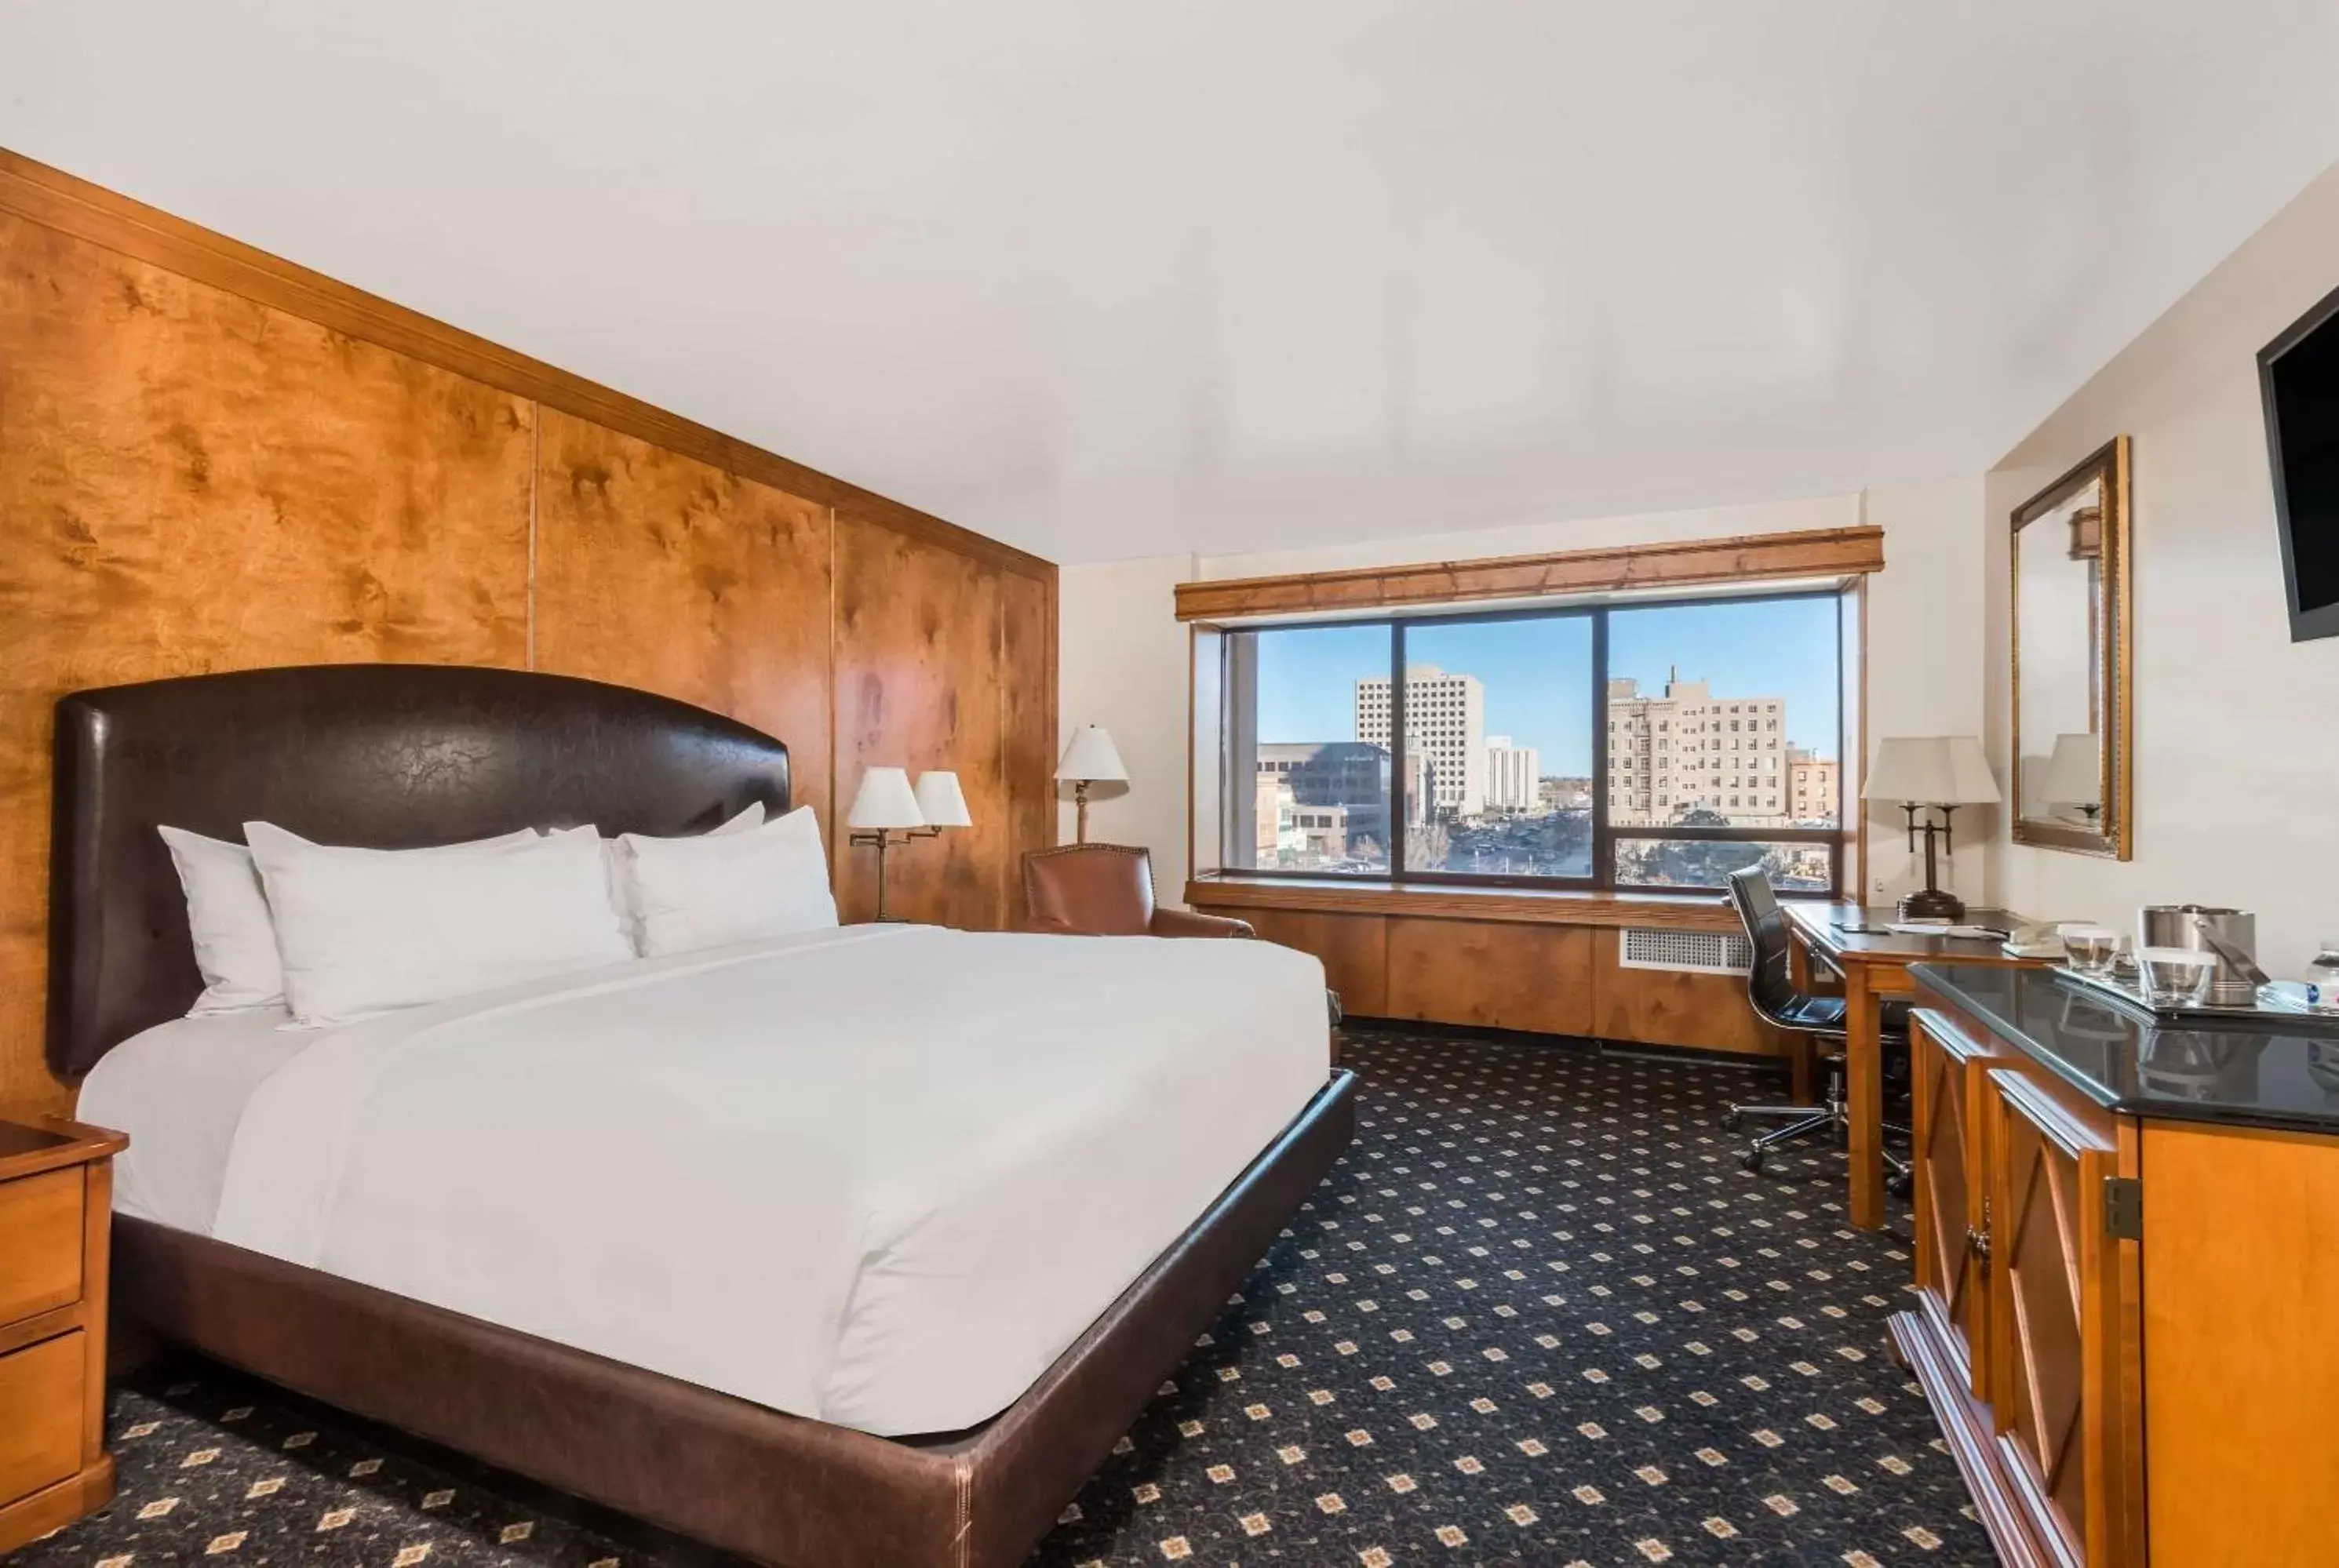 King Room with City View in The Antlers, A Wyndham Hotel